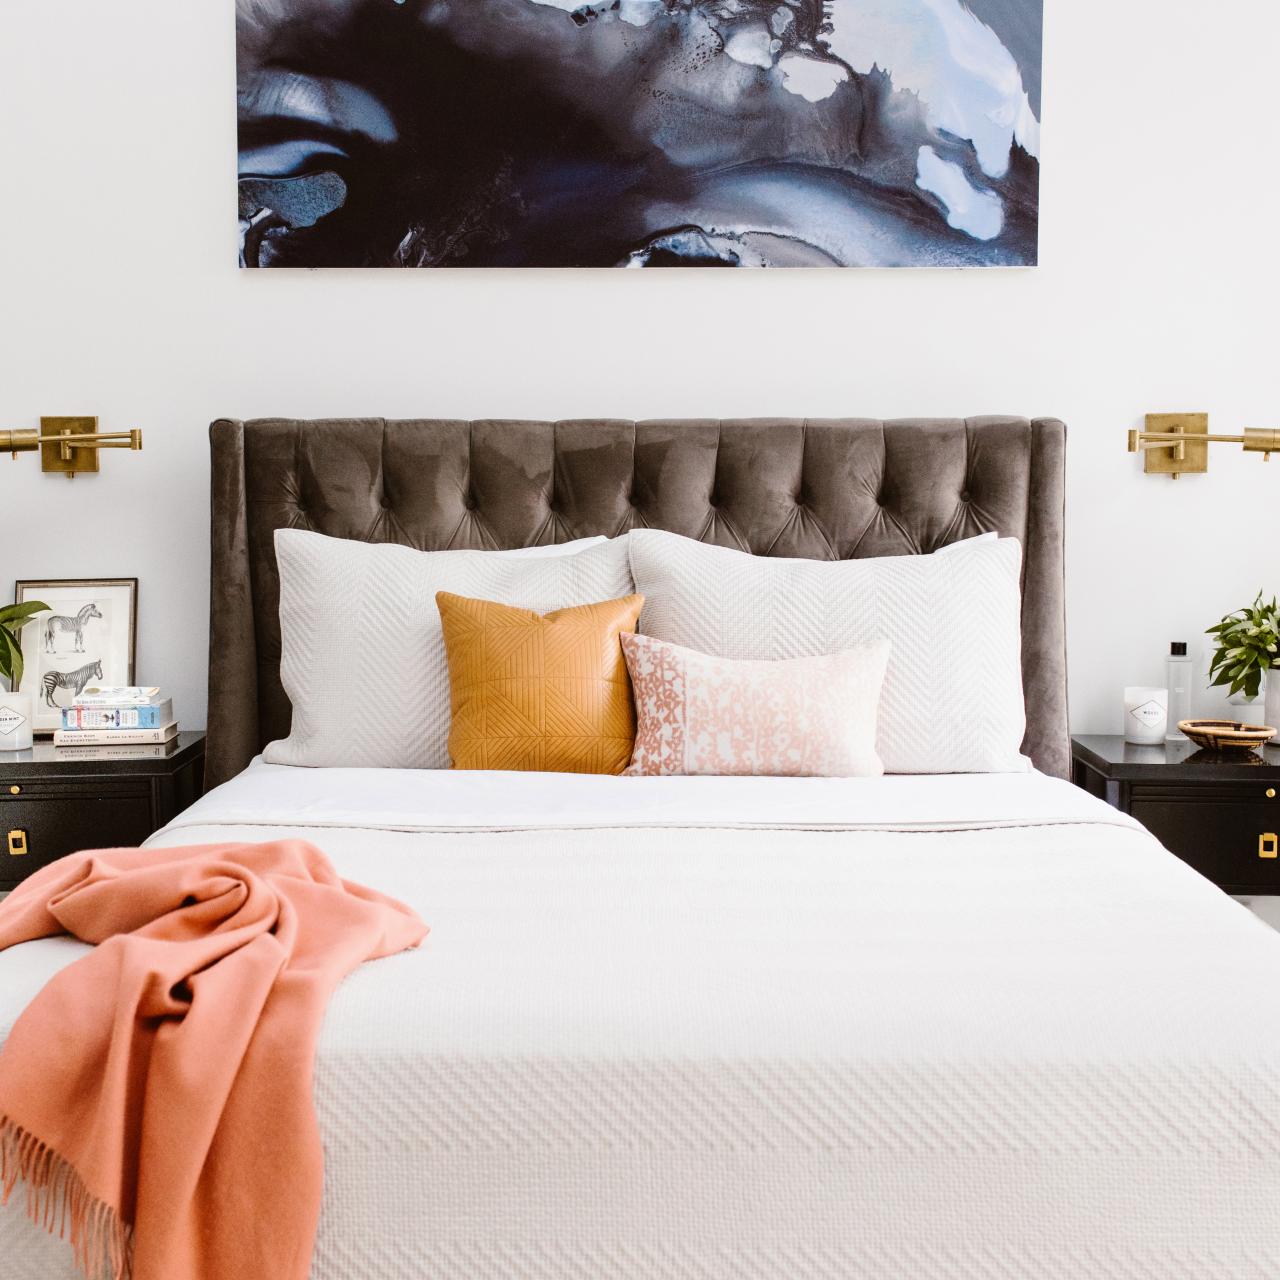 Cozy Ideas to Make Your Guest Room Feel Like Home